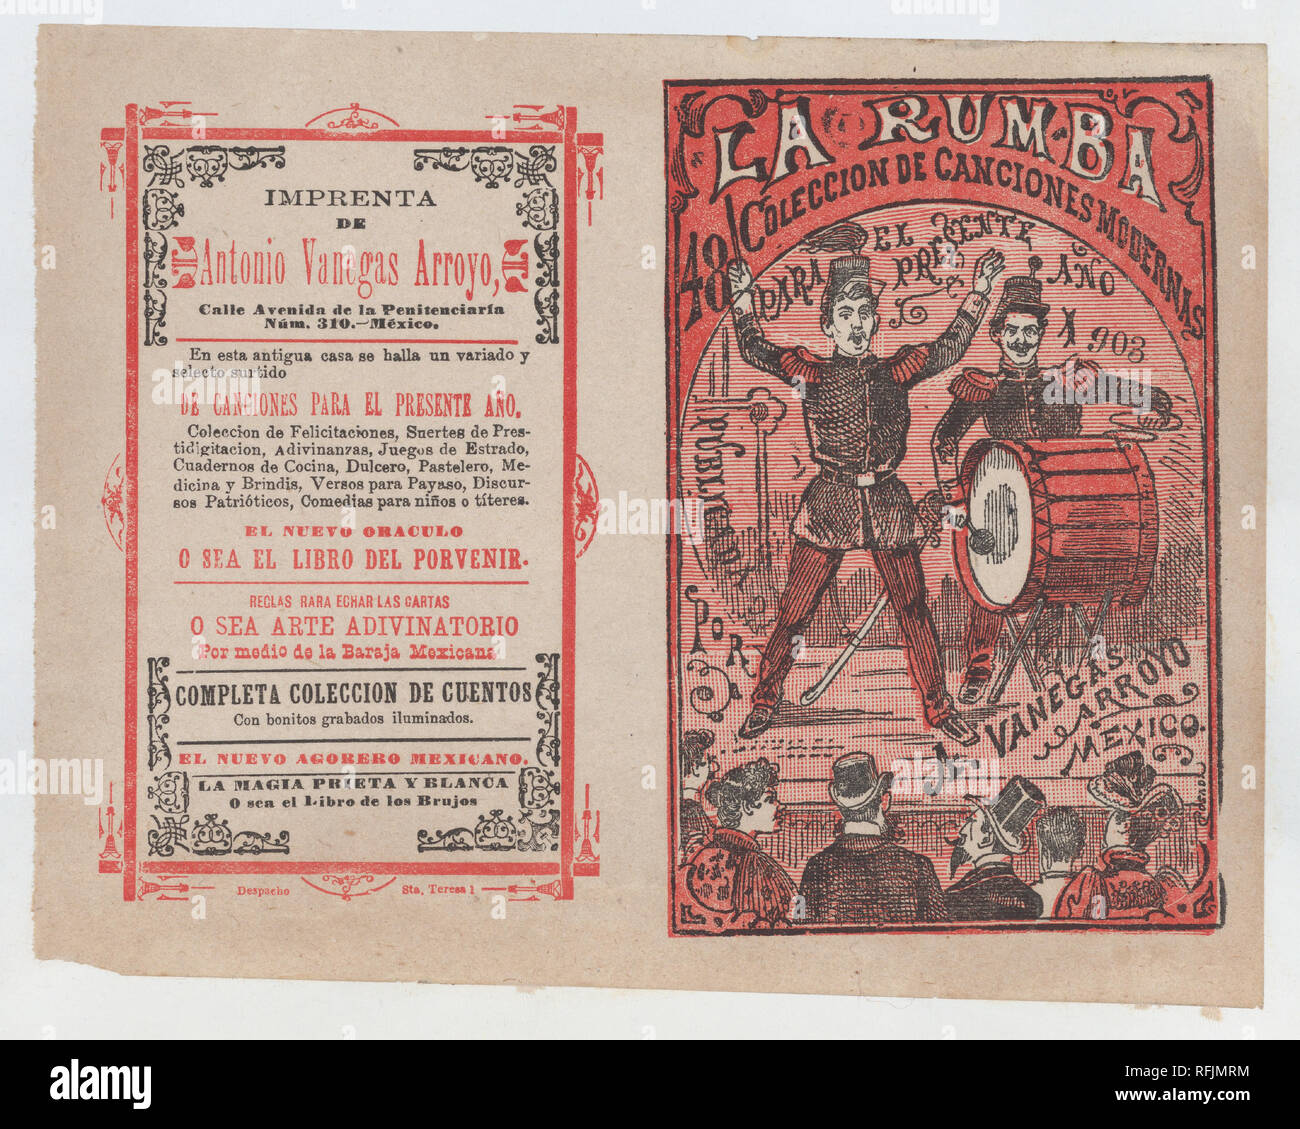 Cover for 'La Rumba: Coleccion de Canciones Modernas para el Presente Año 1903', a conductor and a drummer performing on stage for an audience. Artist: José Guadalupe Posada (Mexican, 1851-1913). Dimensions: Sheet: 5 13/16 × 7 7/8 in. (14.8 × 20 cm). Publisher: Antonio Vanegas Arroyo (1850-1917, Mexican). Date: ca. 1903. Museum: Metropolitan Museum of Art, New York, USA. Stock Photo